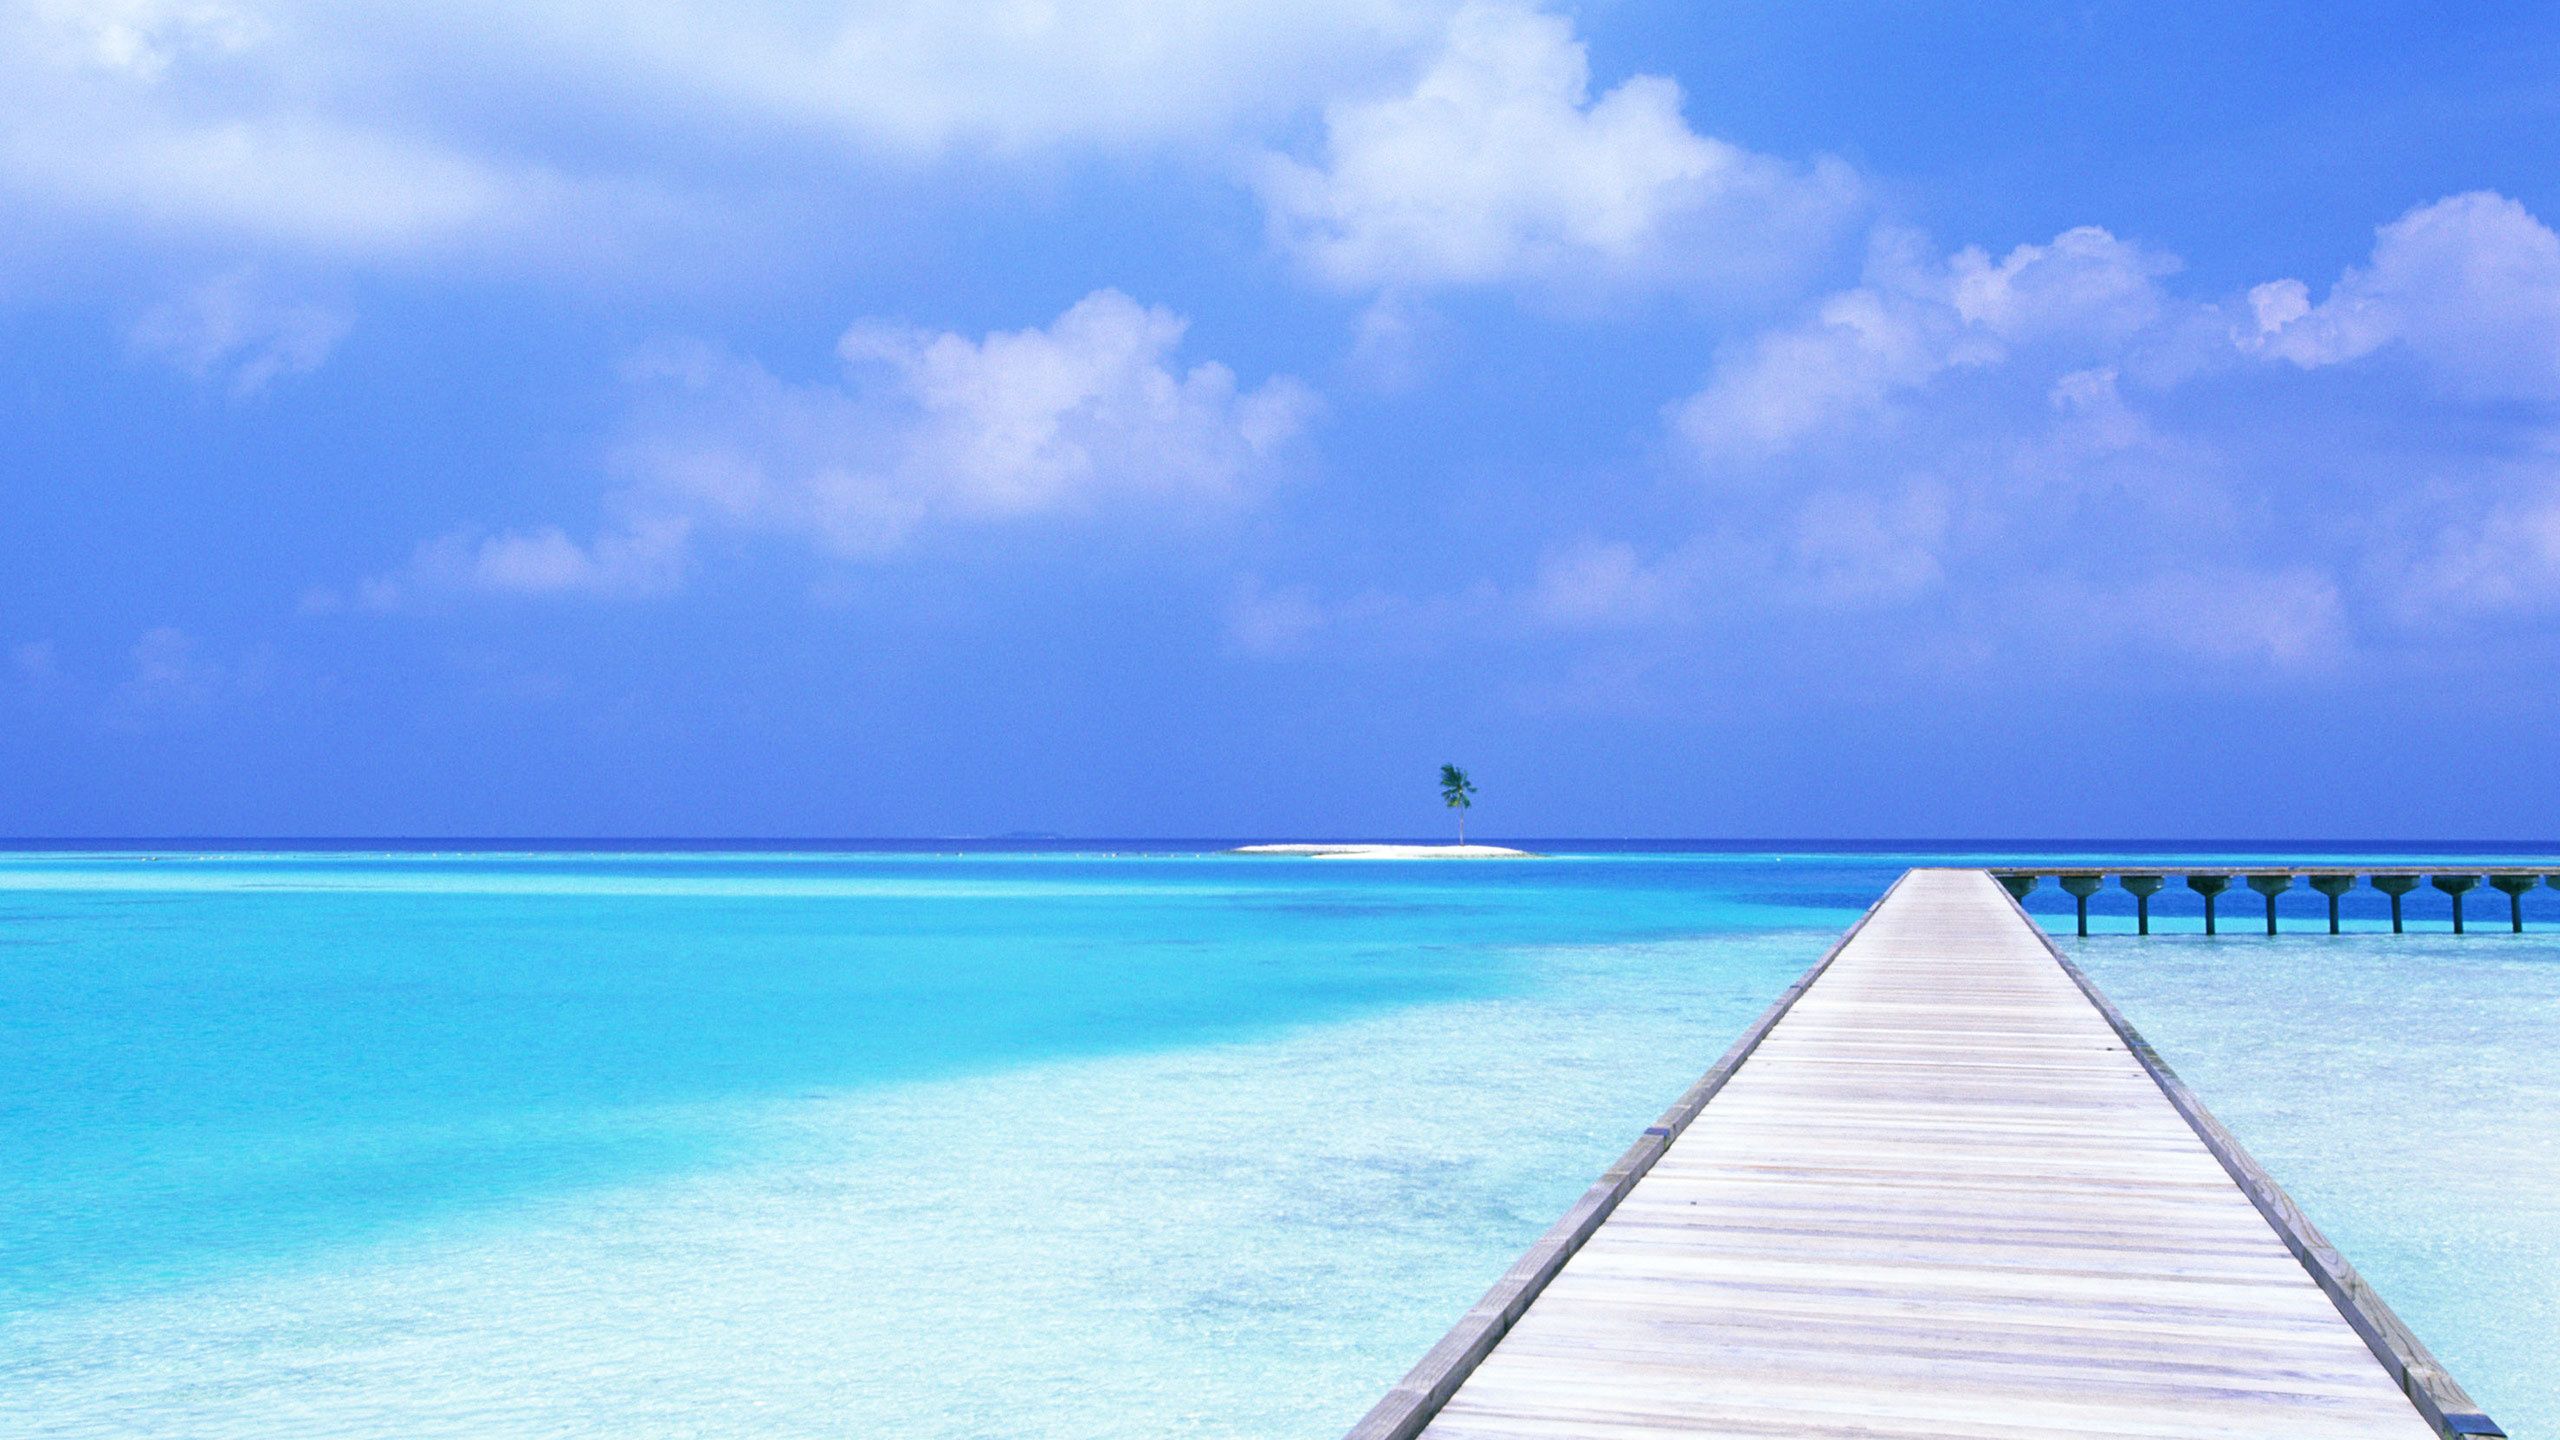 Awesome crystal blue ocean wallpaper - Beach Backgrounds